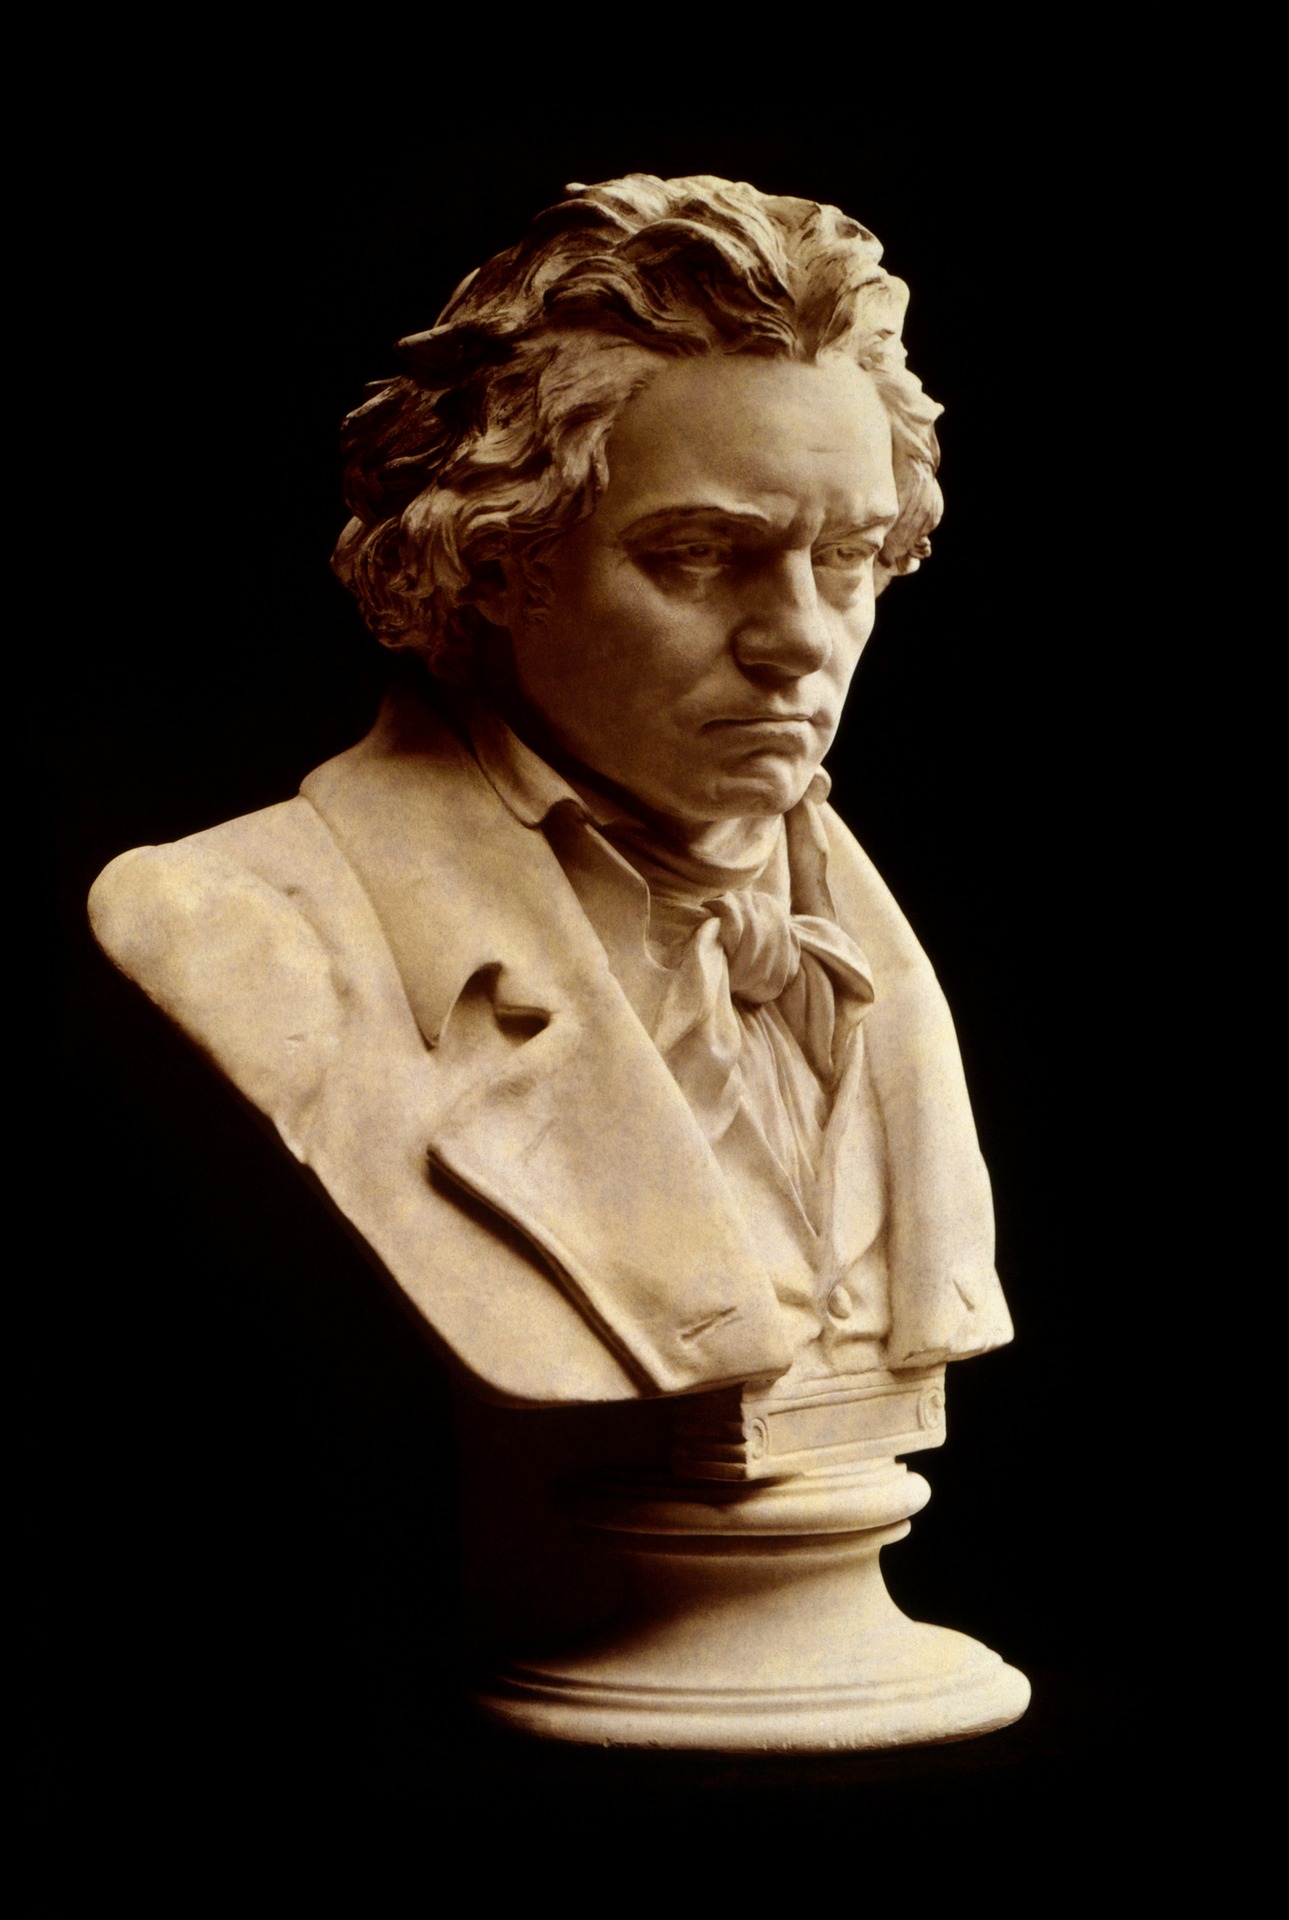 Picture of Beethoven by Pixabay